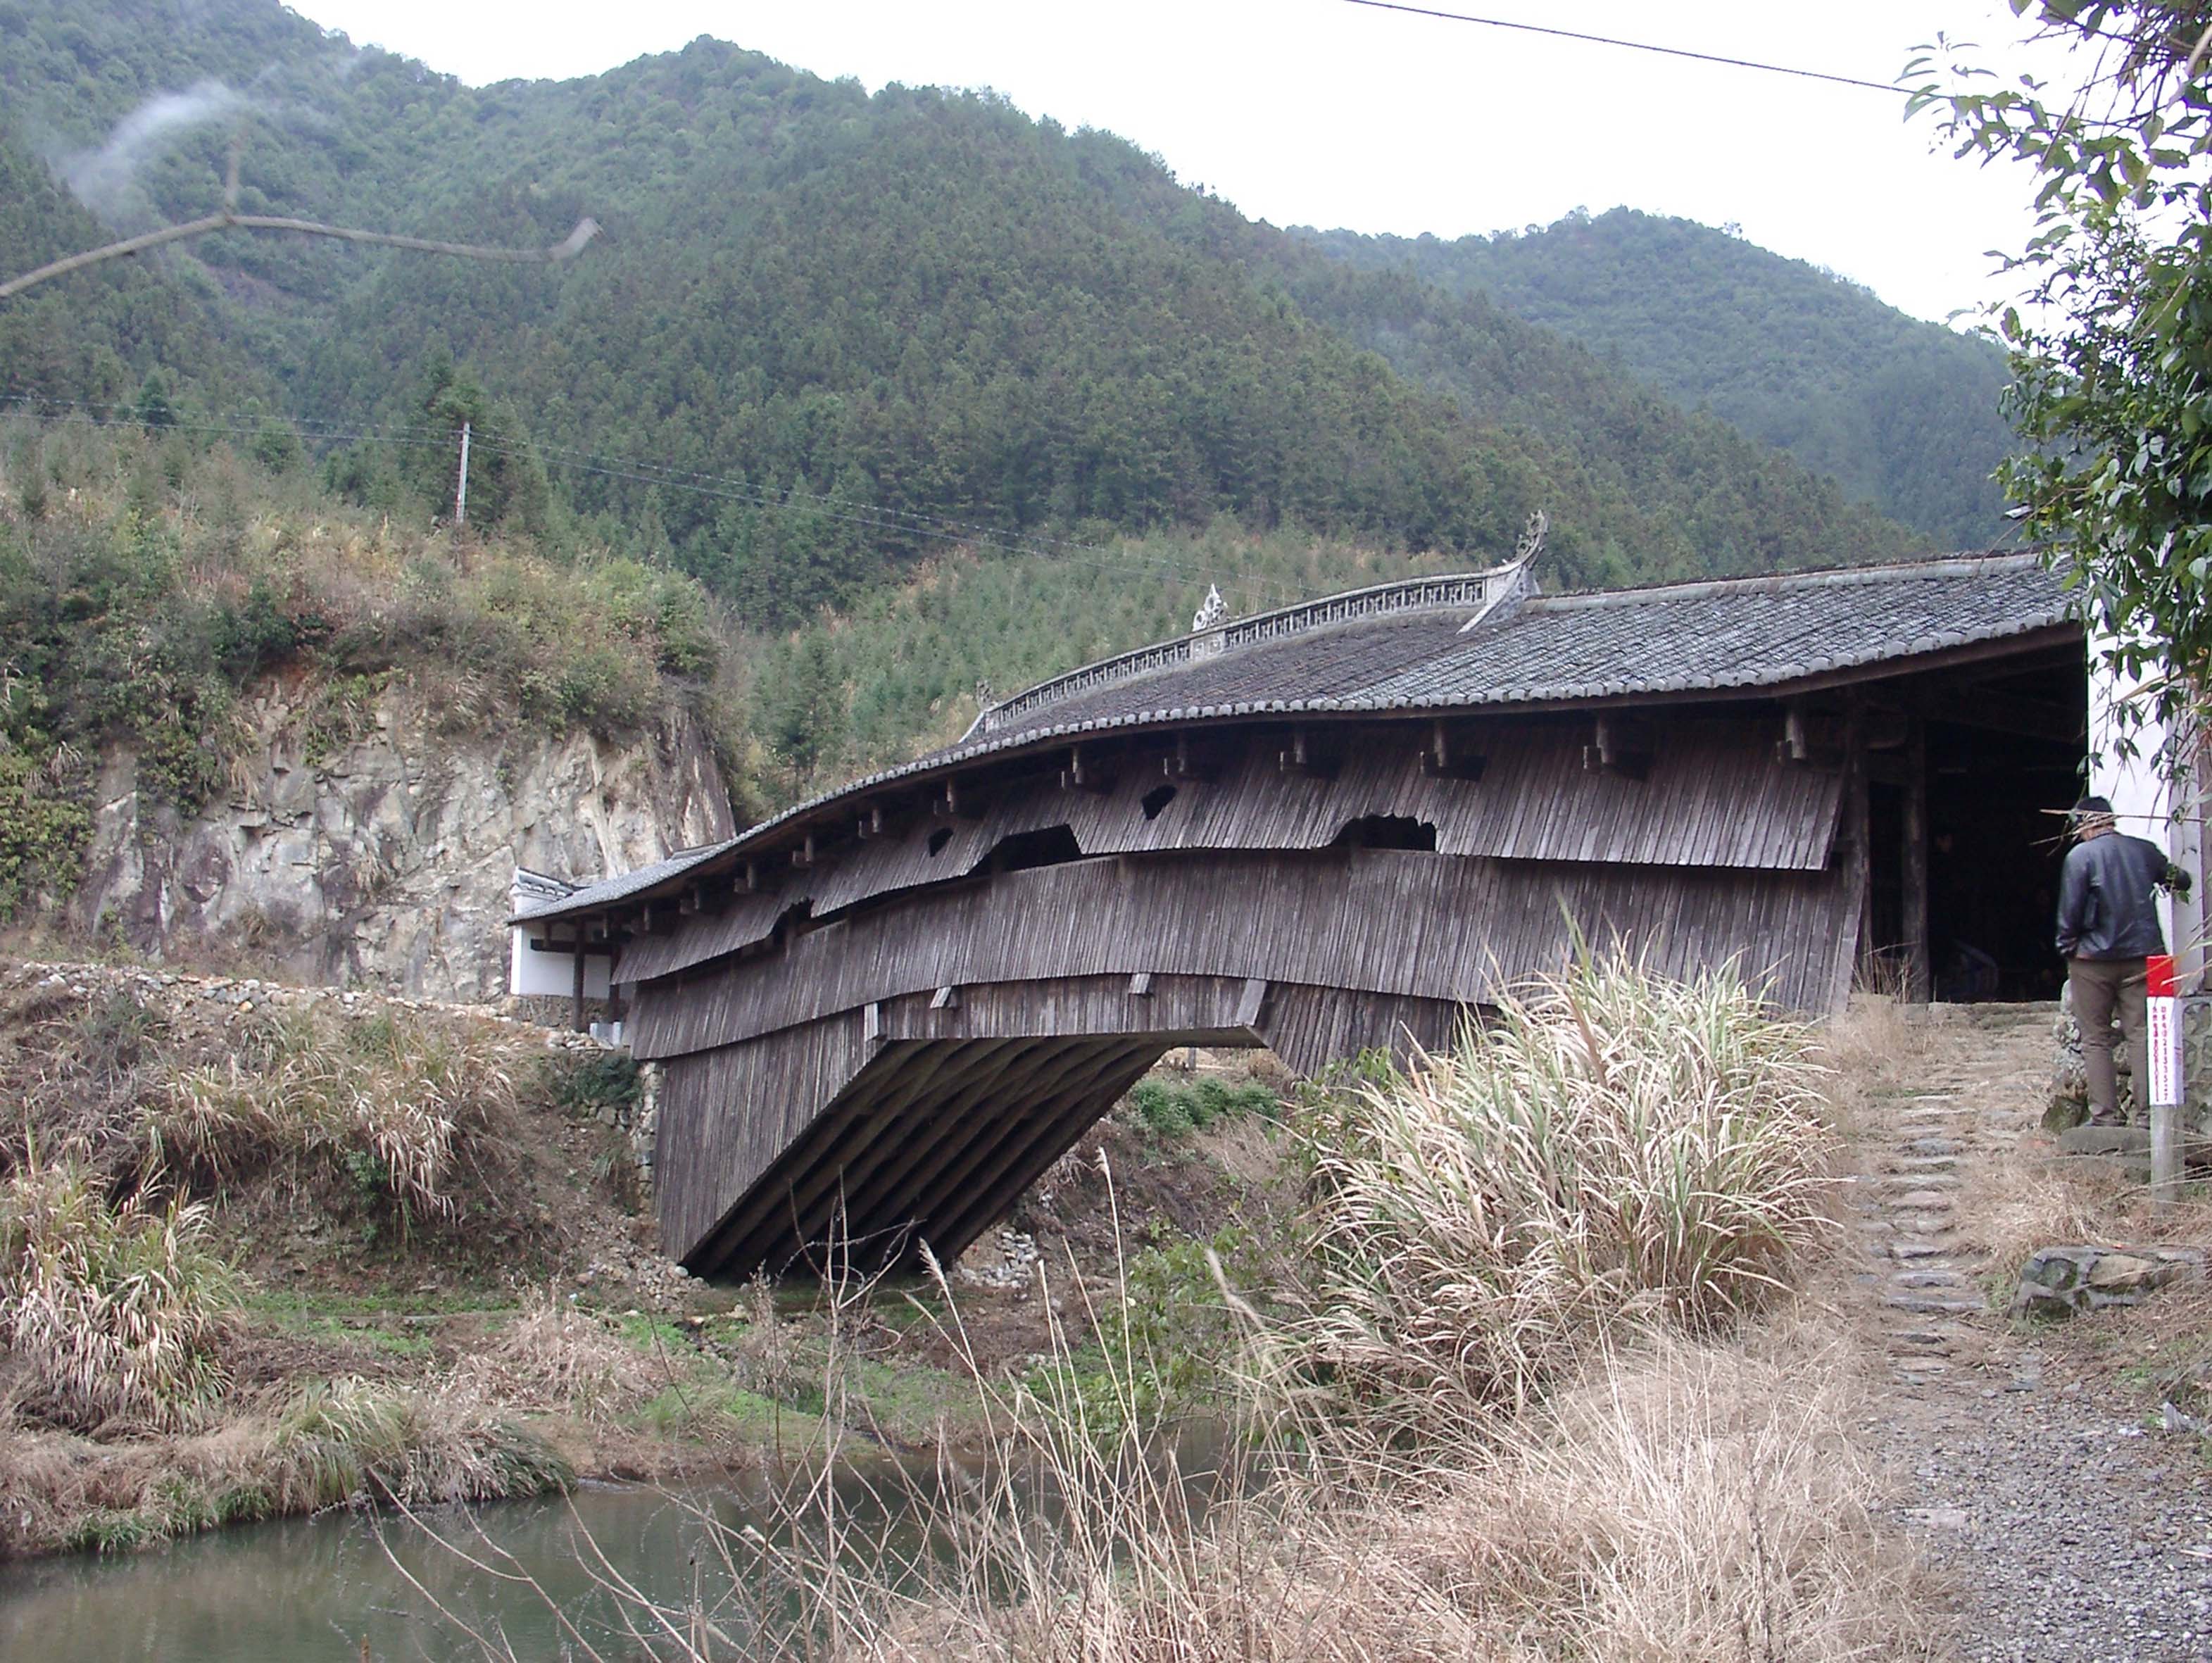 Houkeng Timber Bridge - Award of Excellence 2005